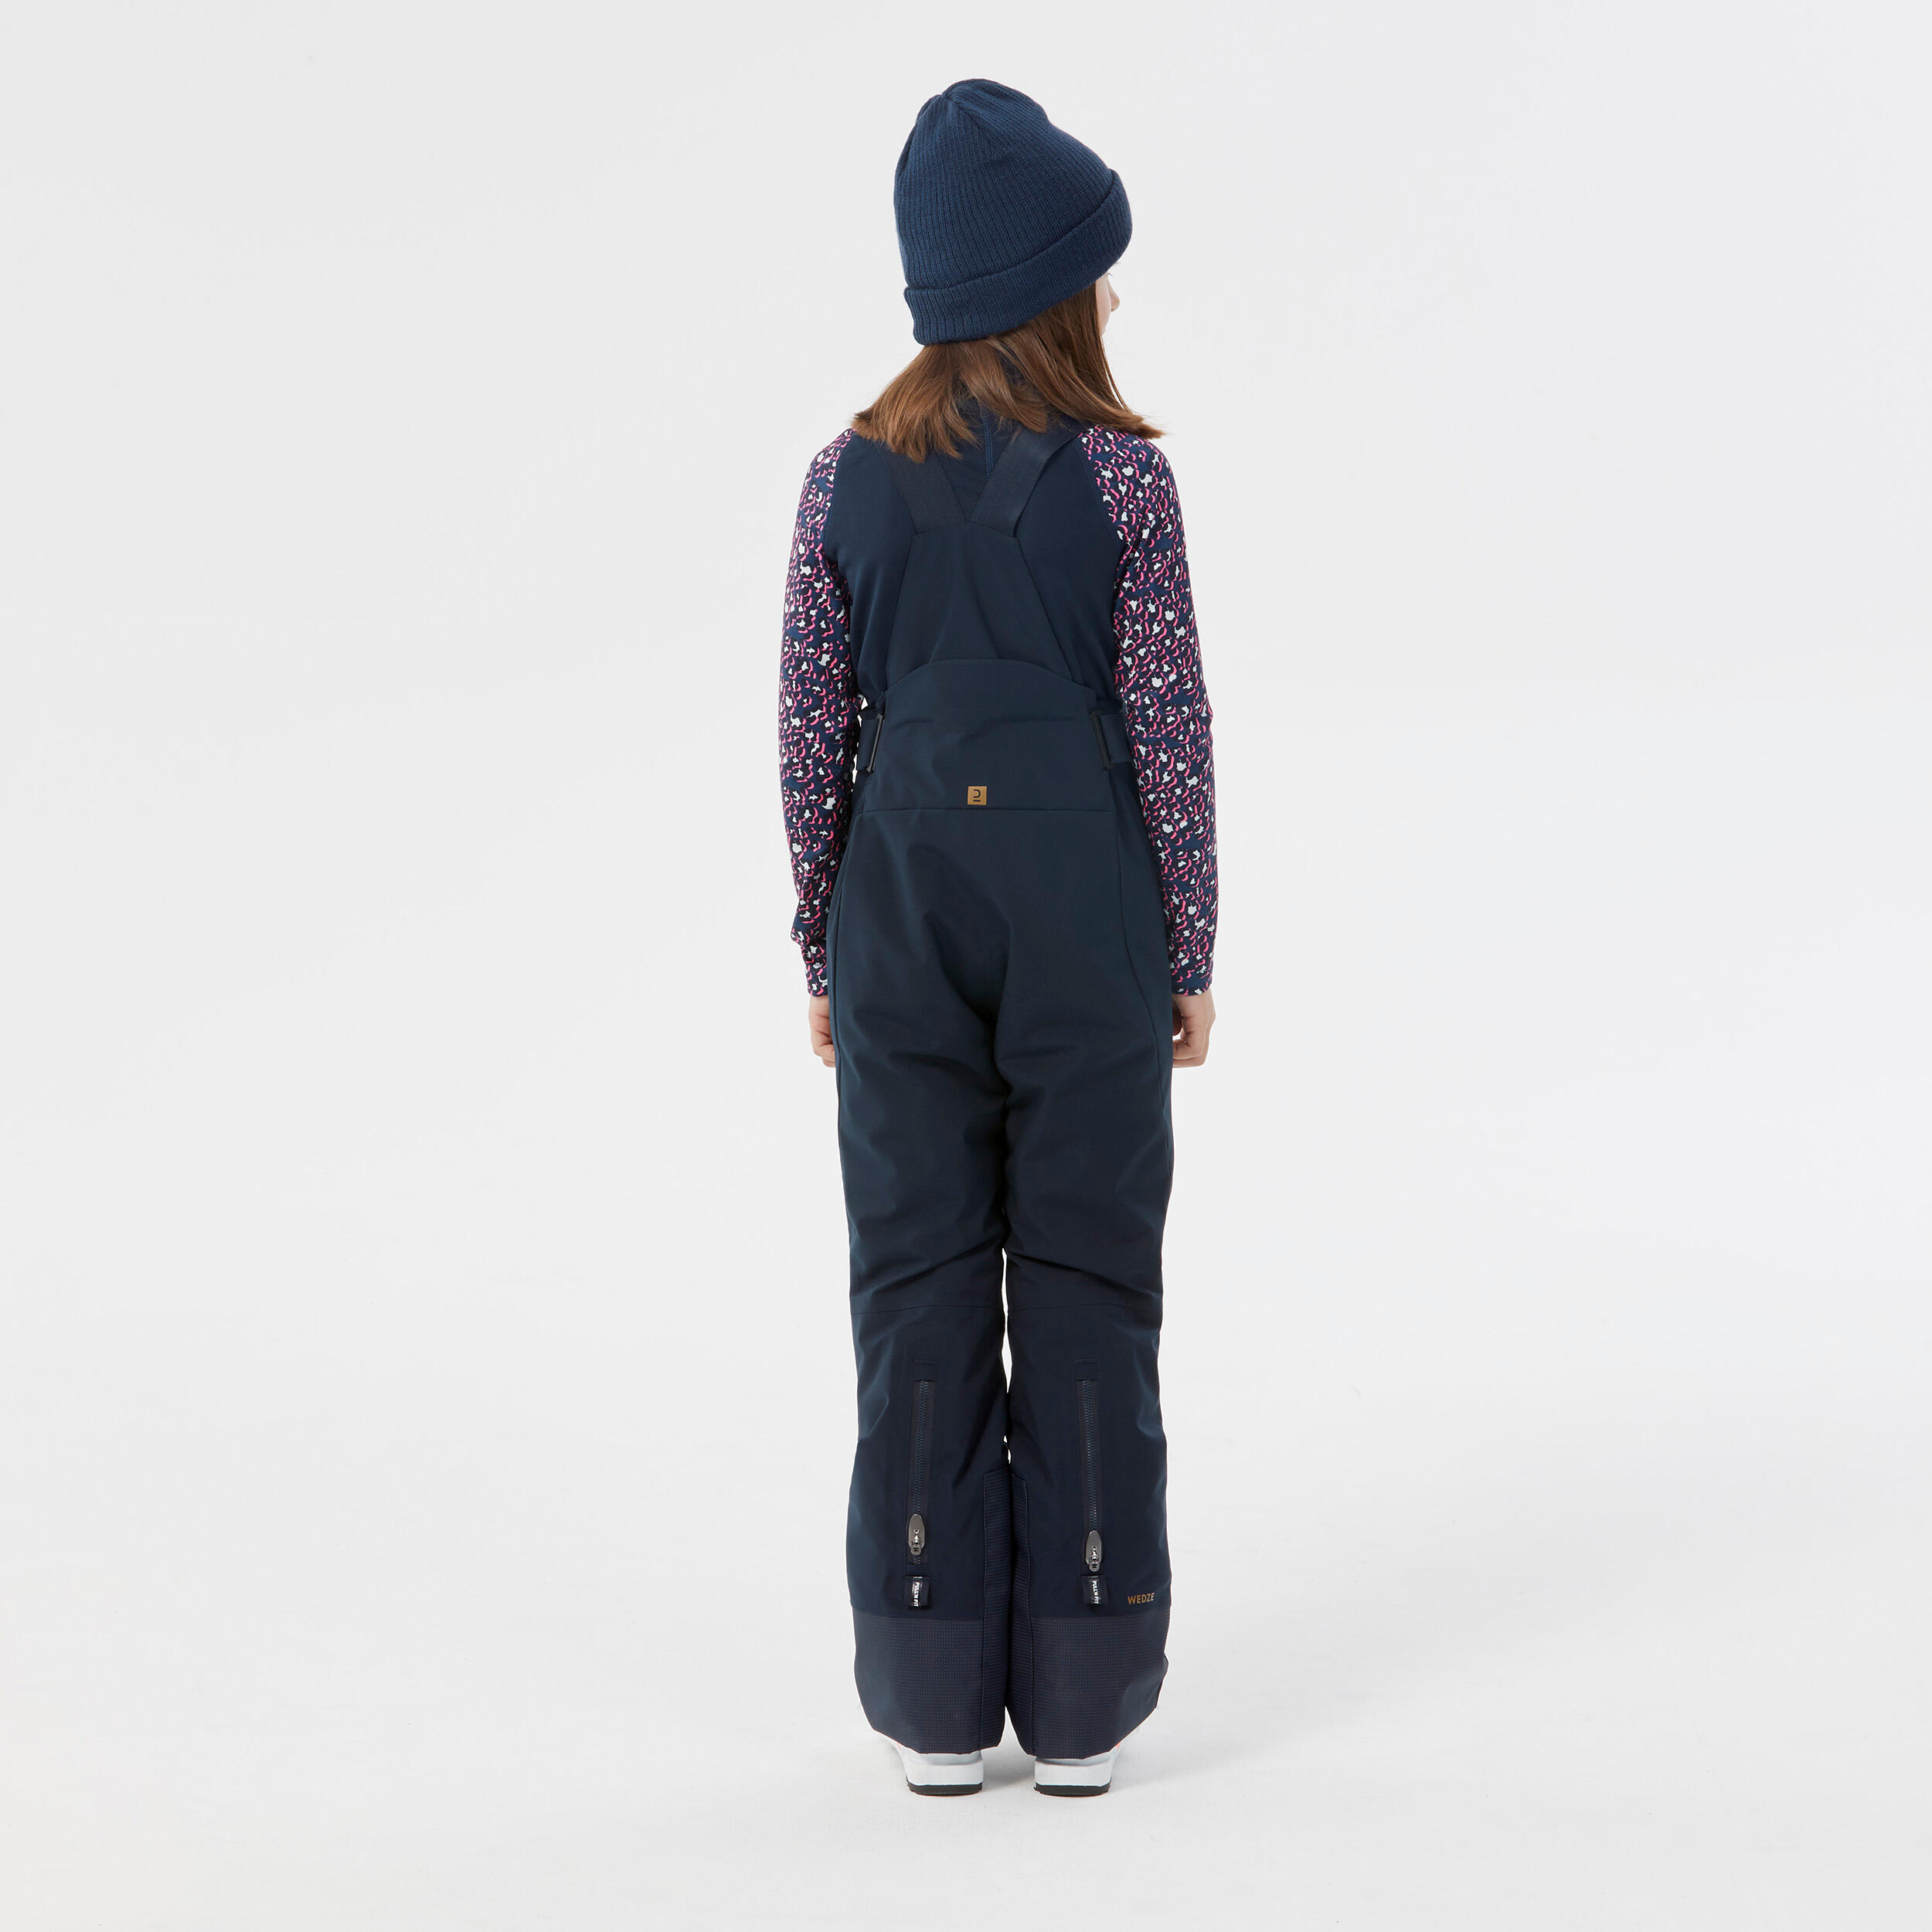 Kids’ warm and waterproof ski trousers PNF 900 - Navy blue 7/8